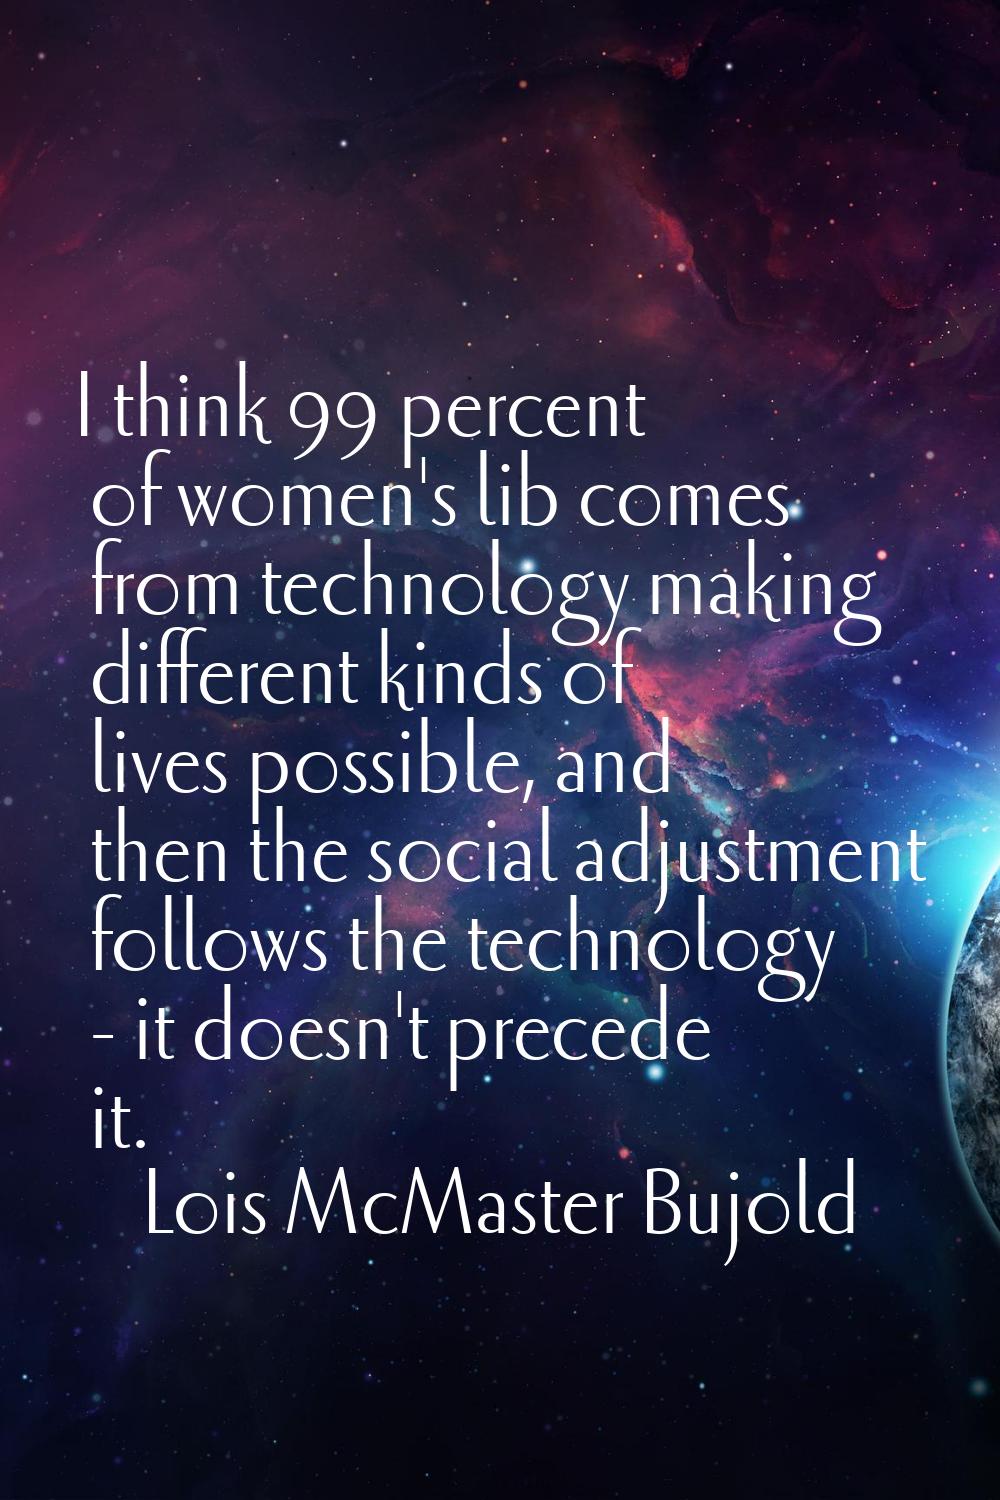 I think 99 percent of women's lib comes from technology making different kinds of lives possible, a